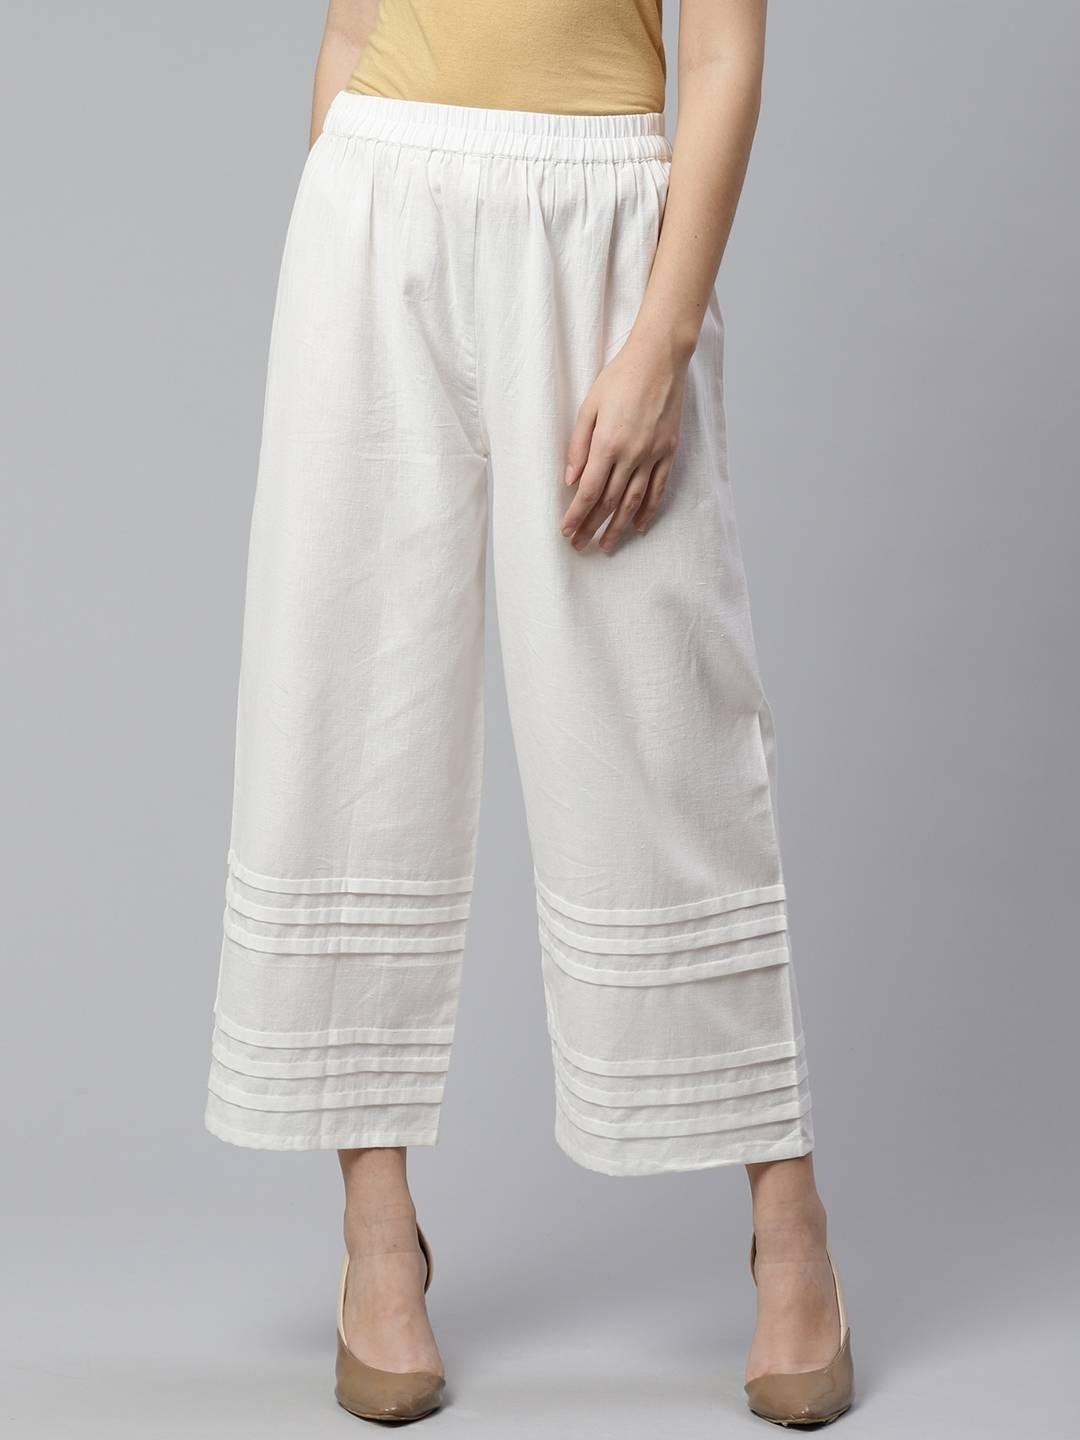 Off-White Solid Cotton Palazzos - Libas